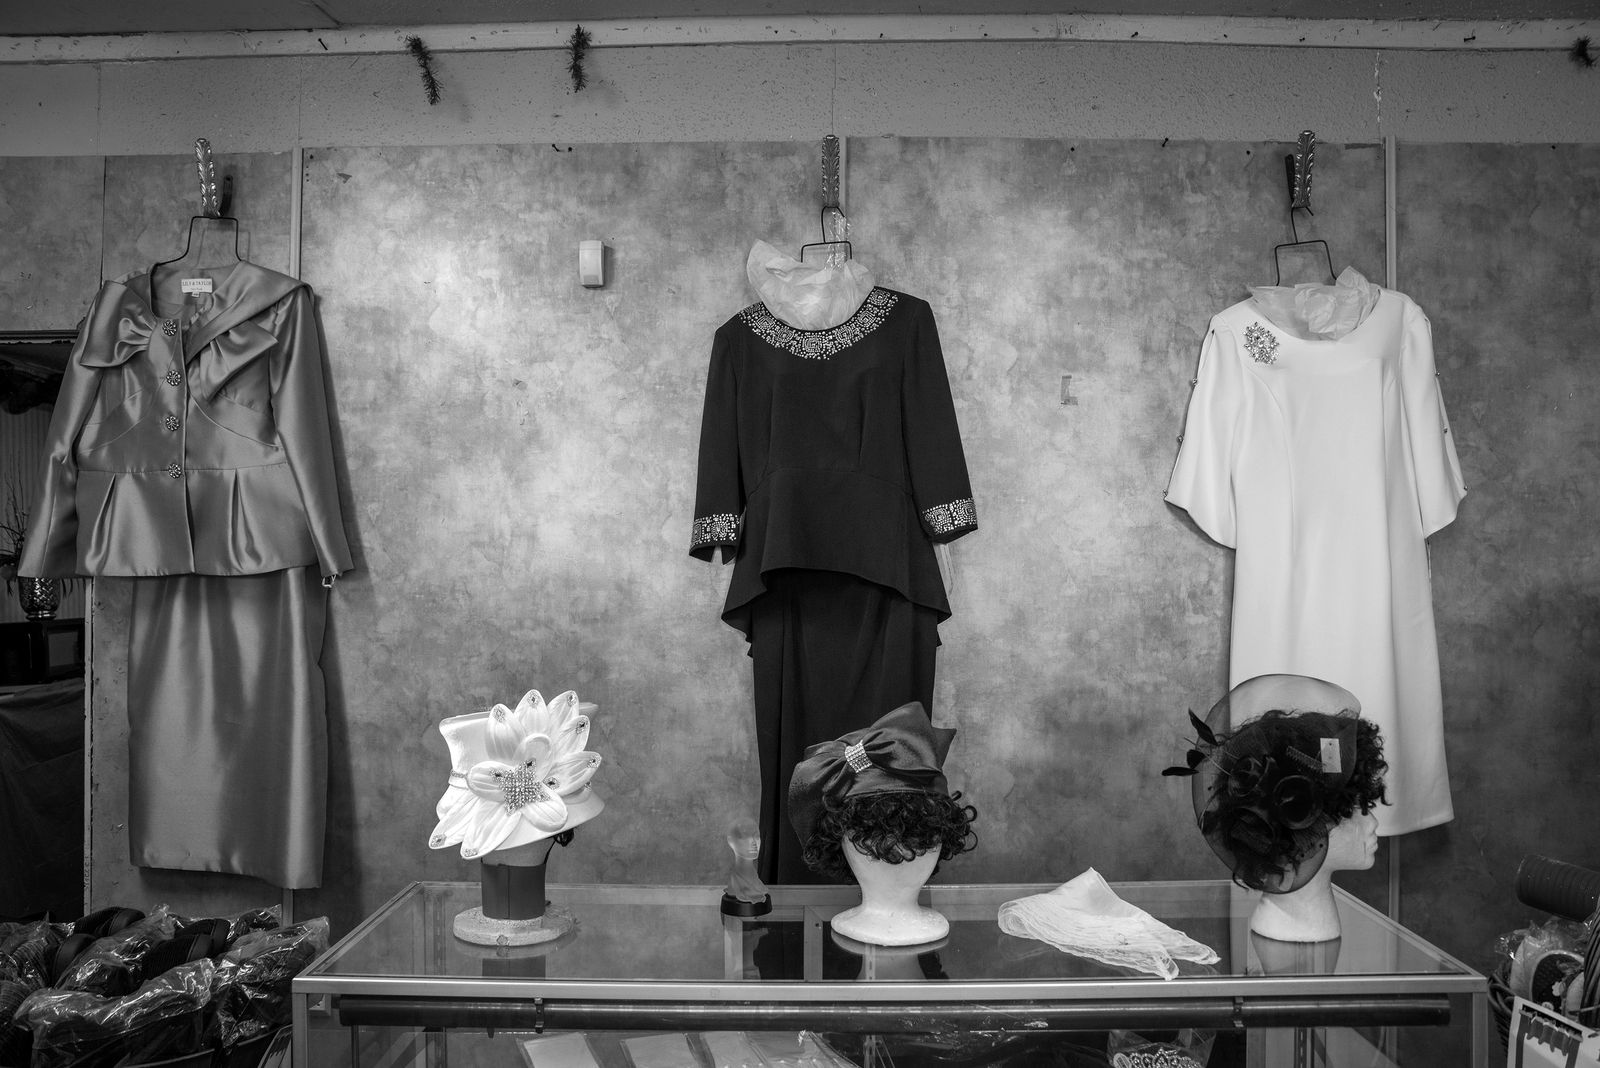 © Rebecca Moseman - The Dress Shop. A local dress shop that has remained open during a suffering economy in Clarksdale, Mississippi.